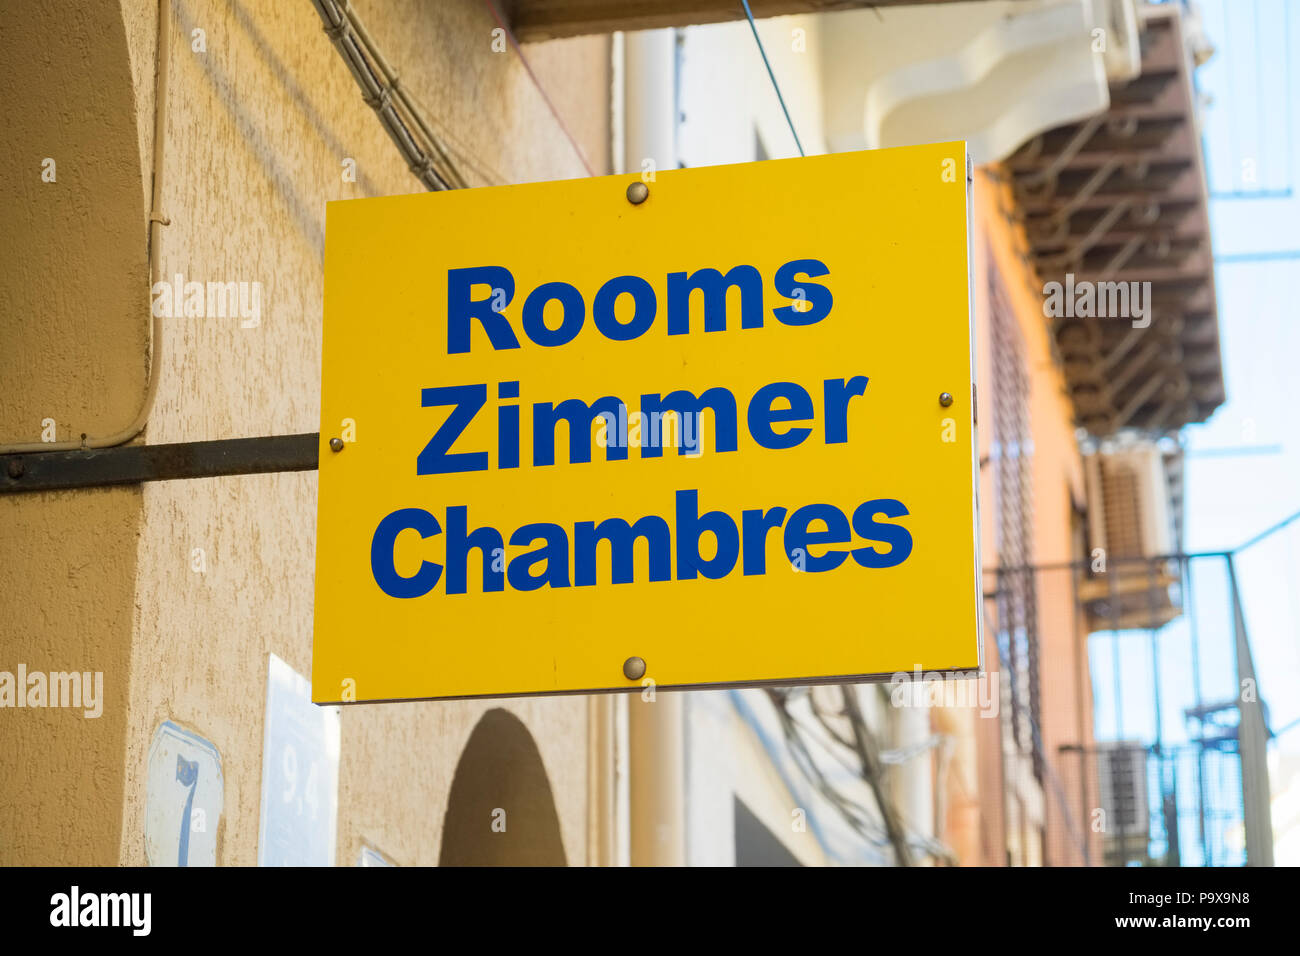 Rooms for hire sign translated into multiple languages English, German and French, Sicily, Italy, Europe Stock Photo